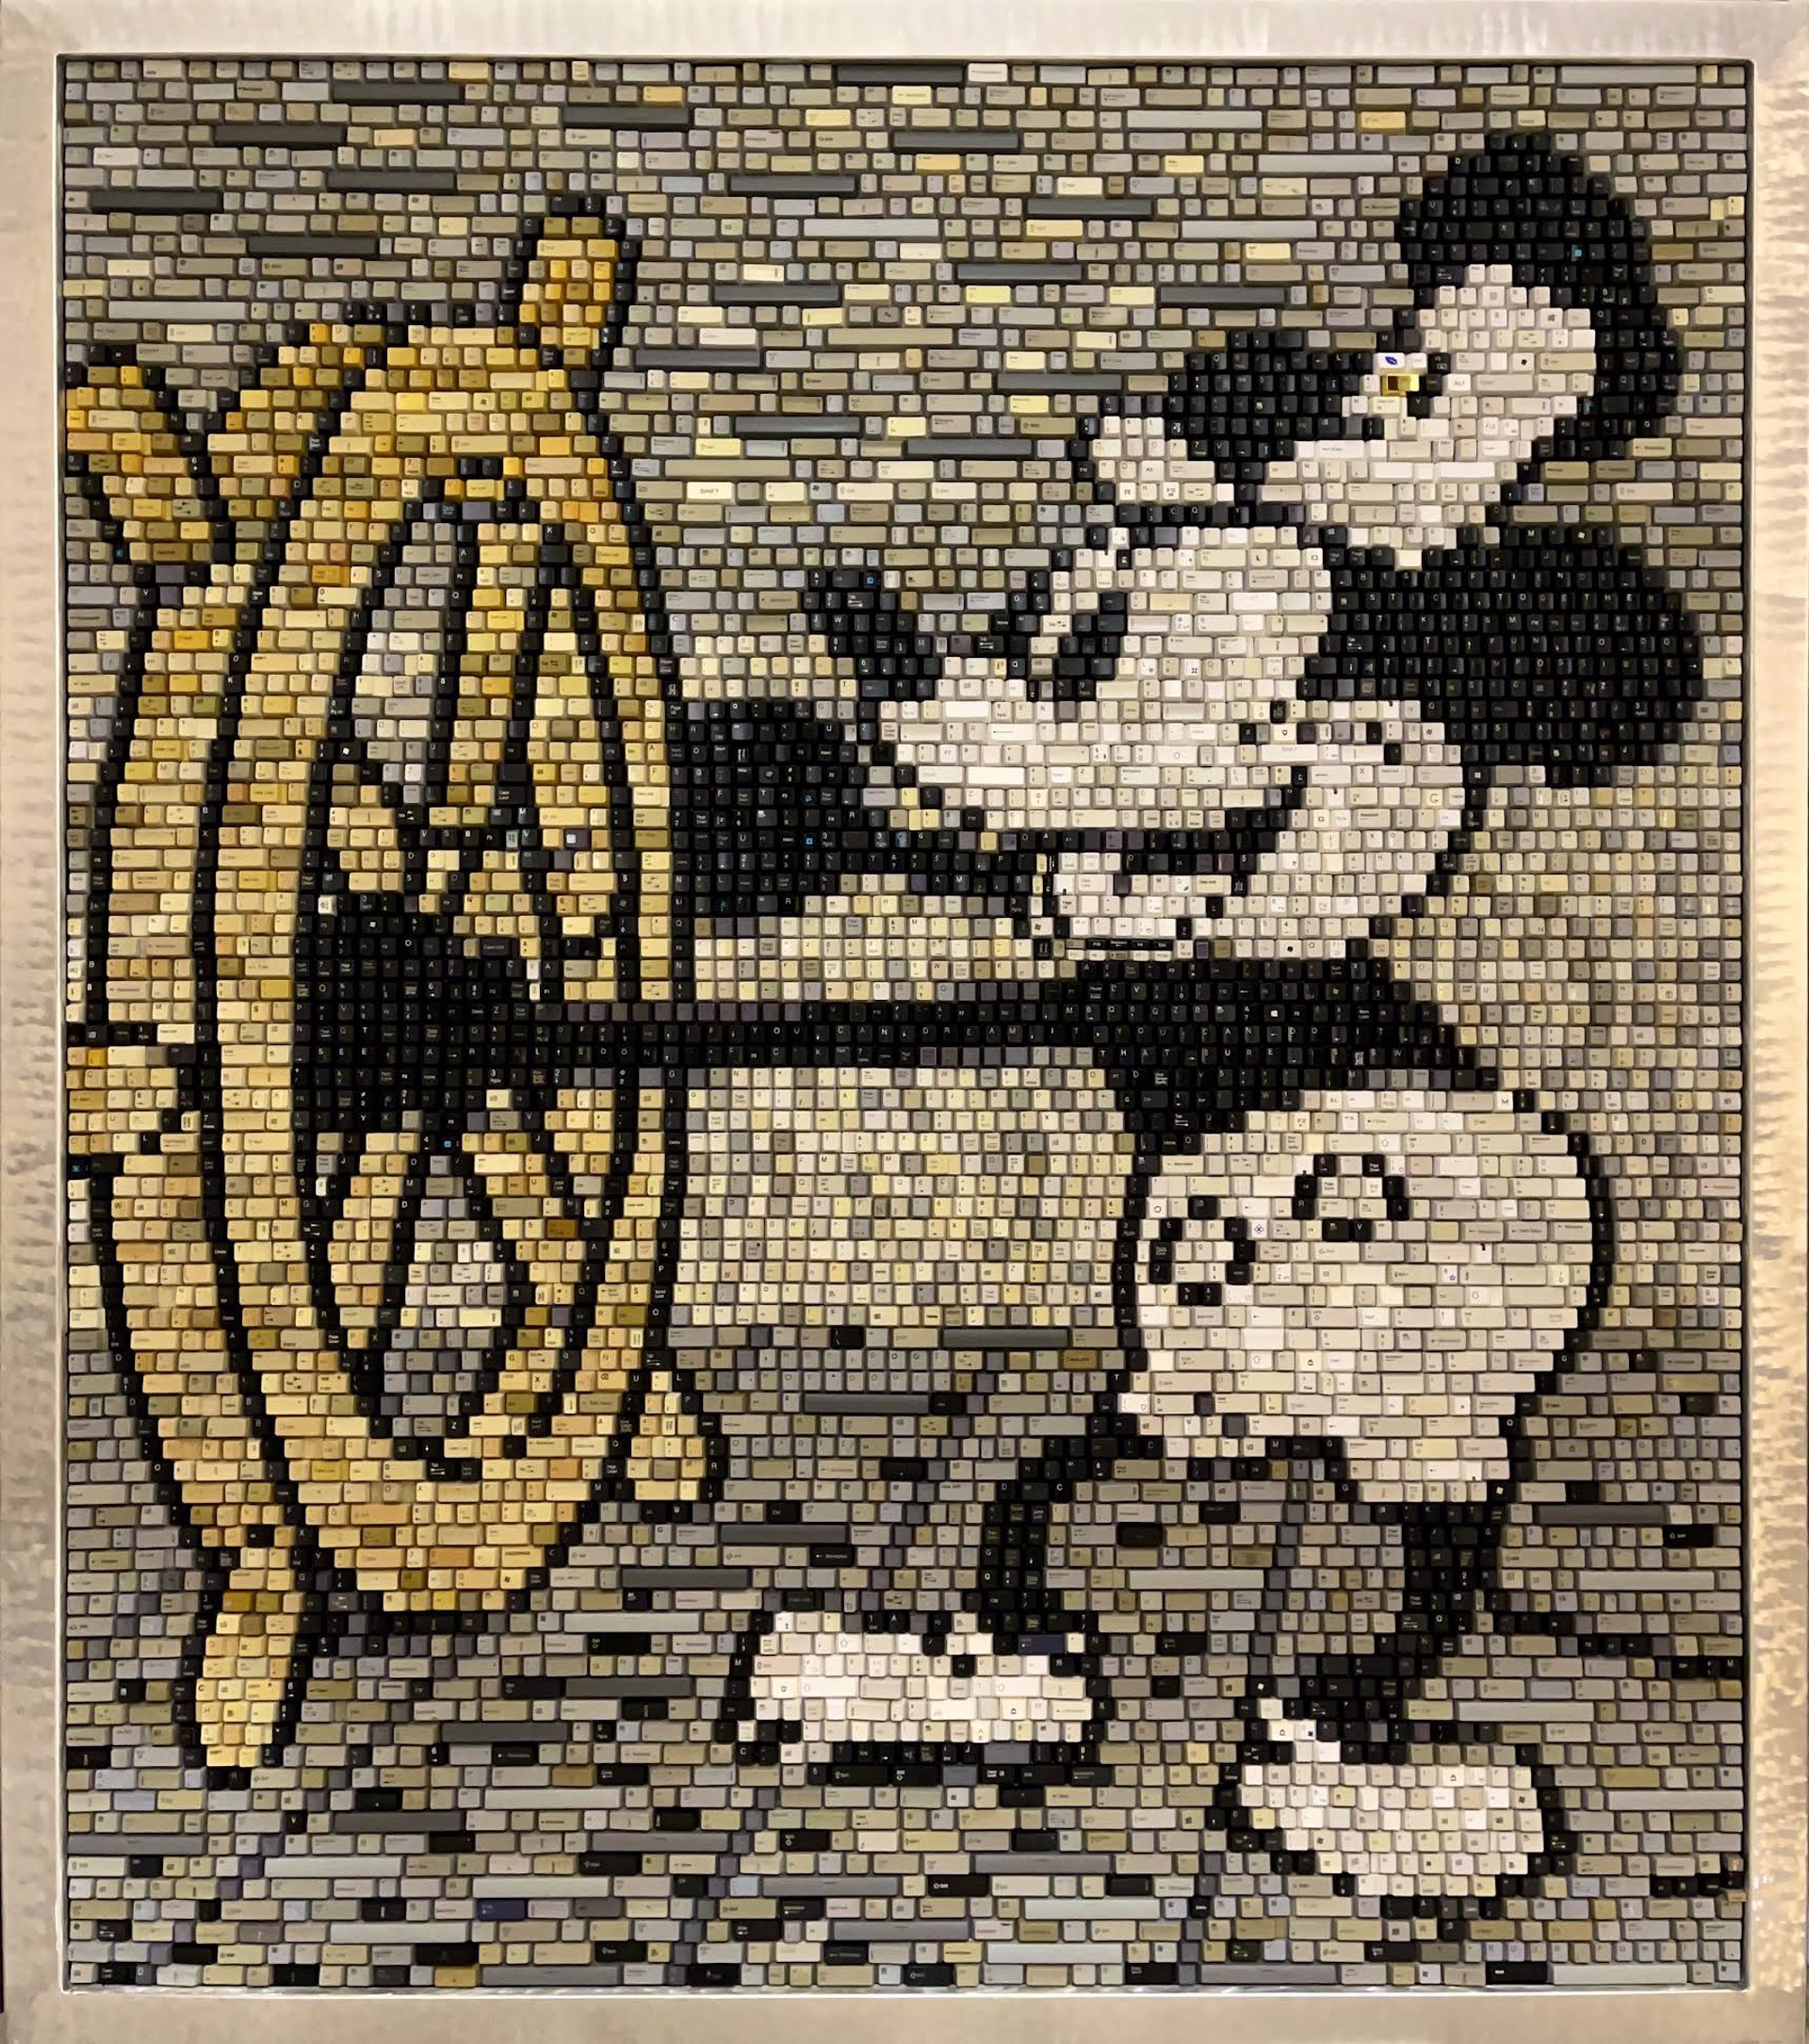 STEAMBOAT WILLIE by Doug Powell